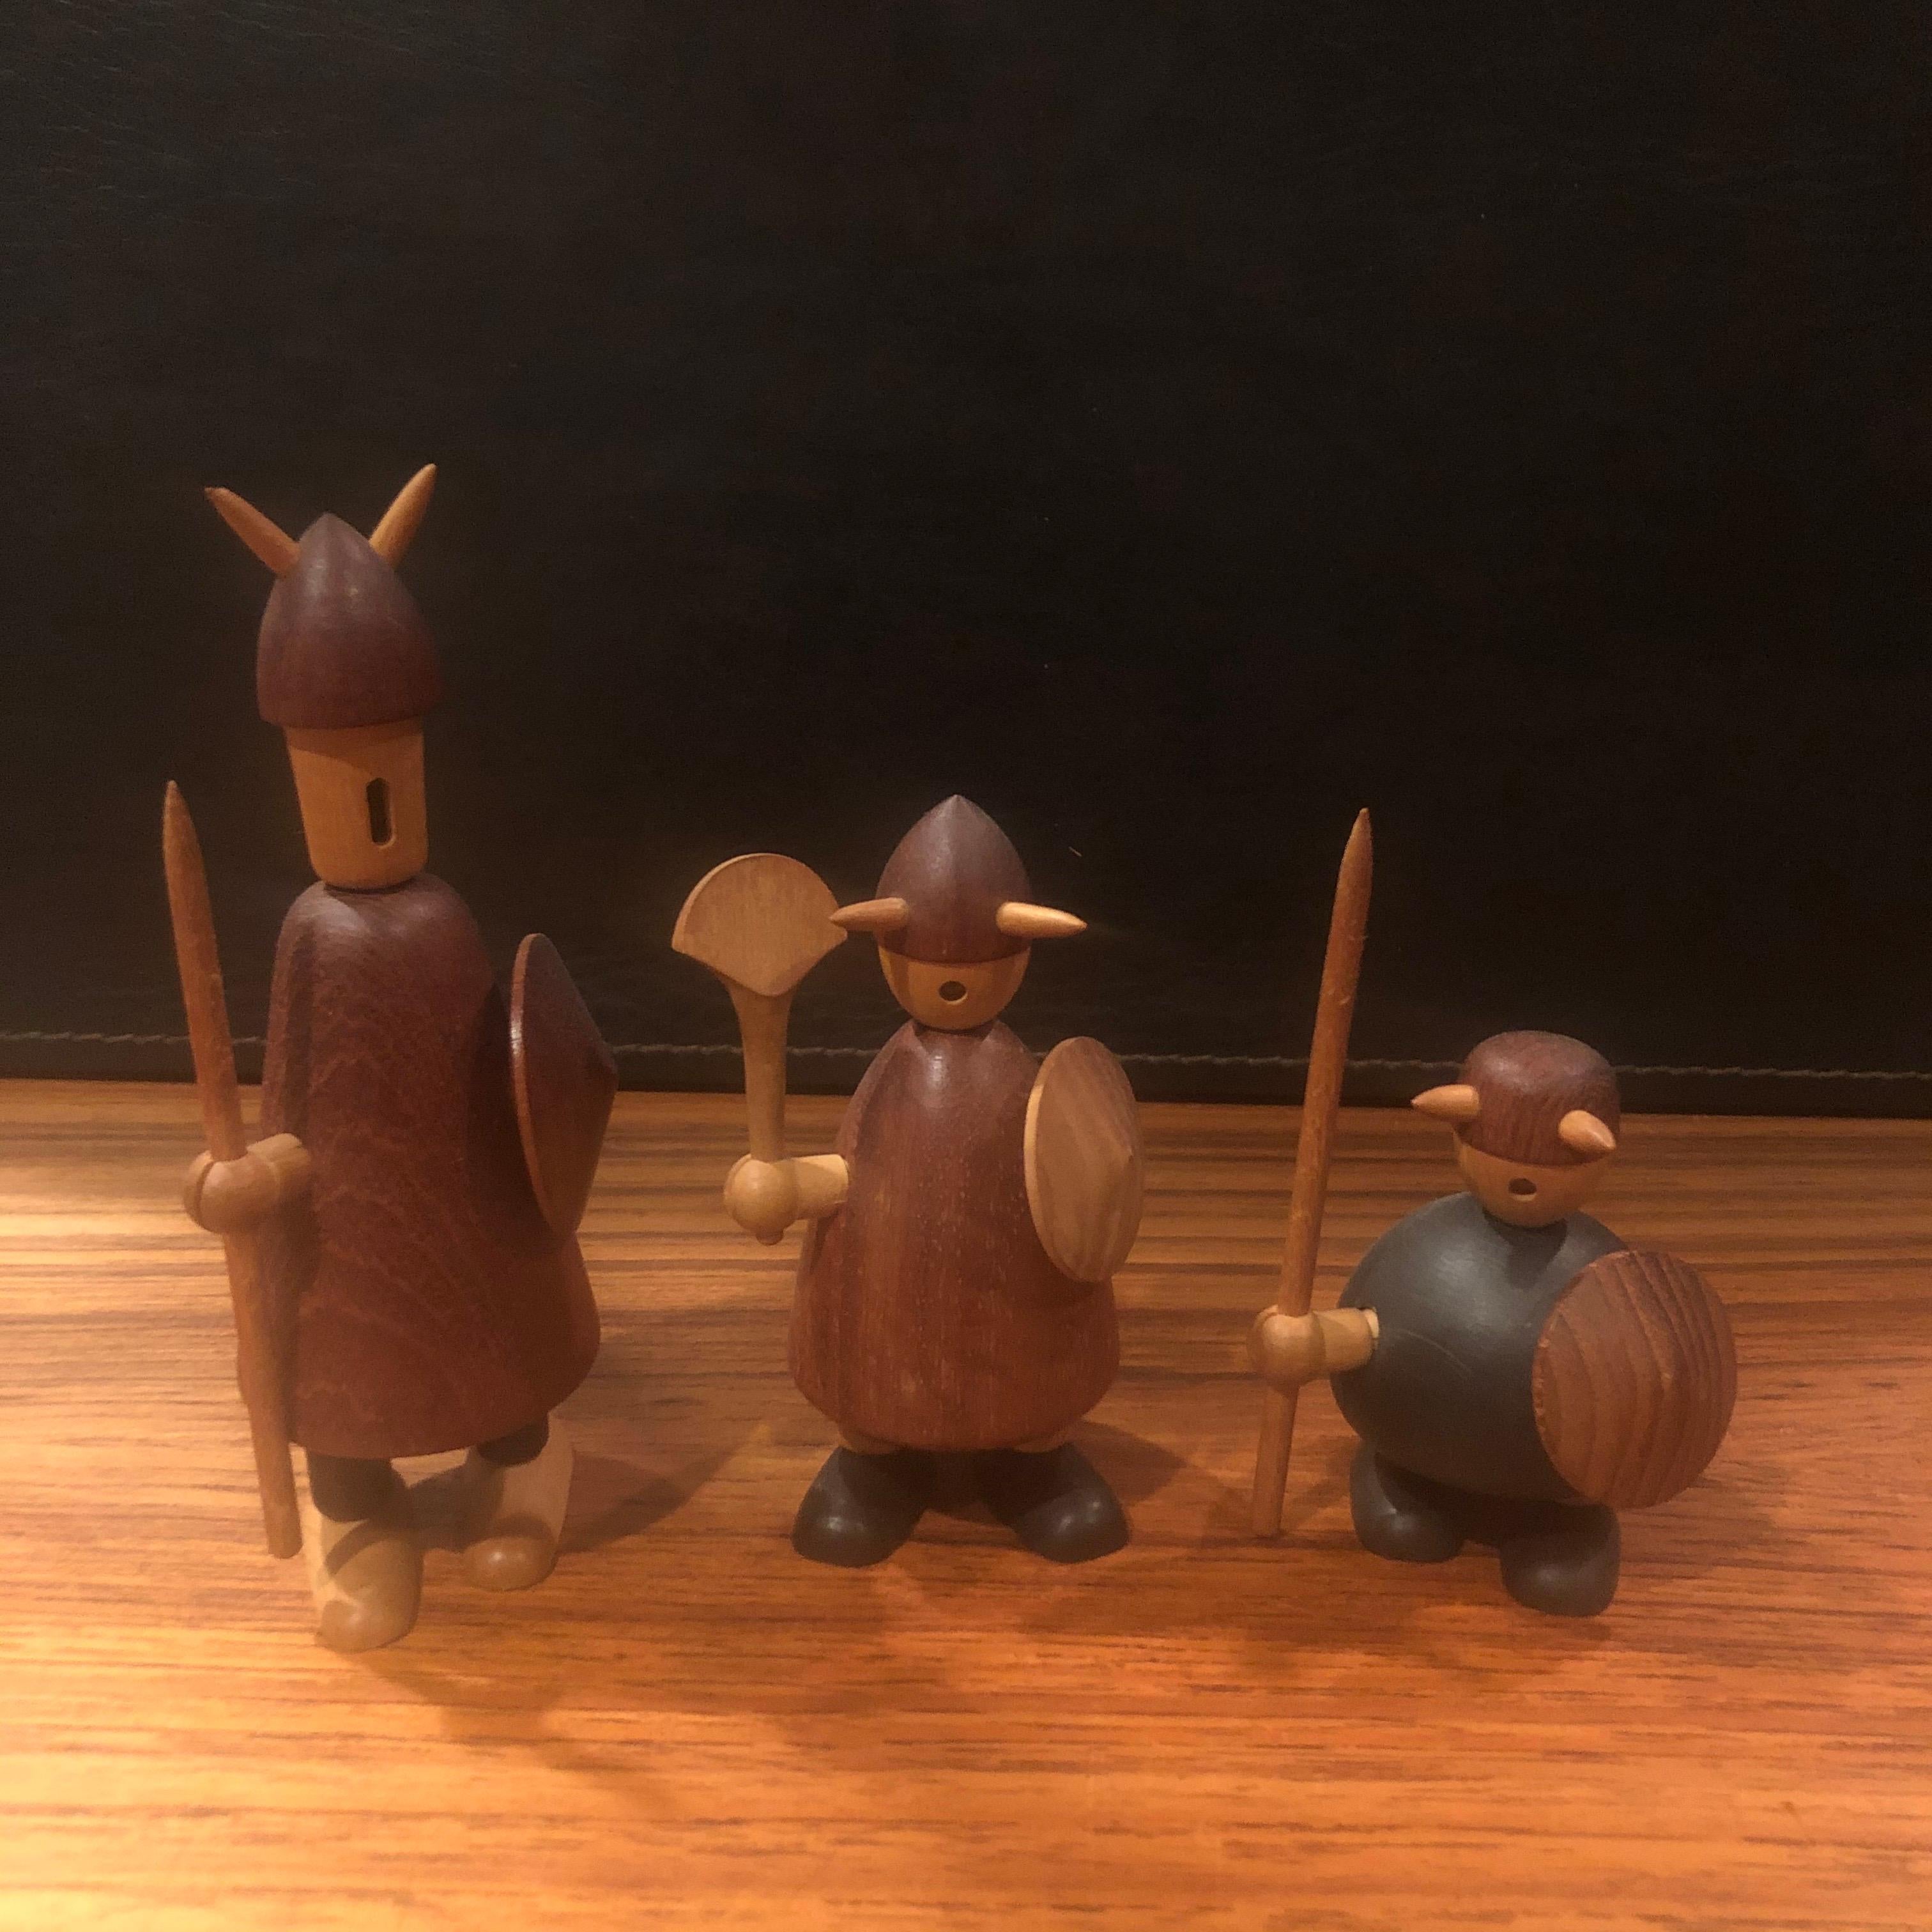 Set of three midcentury Danish Viking figures made of mixed woods by Jacob Jensen, circa 1950s. The figures are in good vintage condition and measure: 5.5